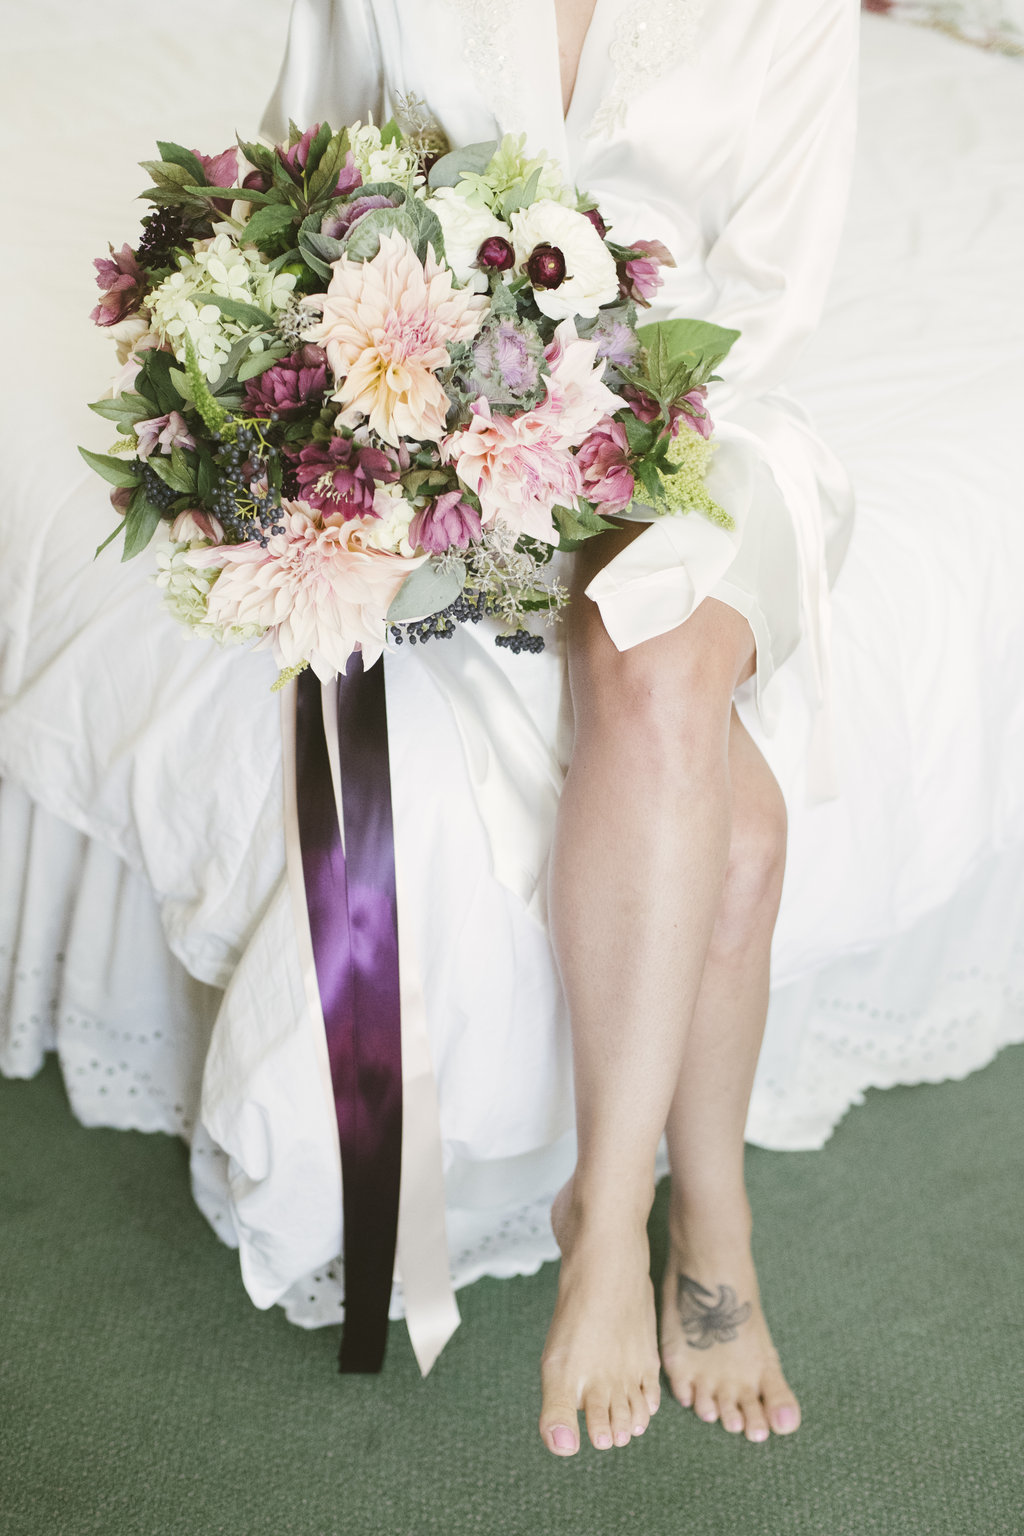 Monica-Relyea-Events-Alicia-King-Photography-Delamater-Inn-Beekman-Arms-Wedding-Rhinebeck-New-York-Hudson-Valley34